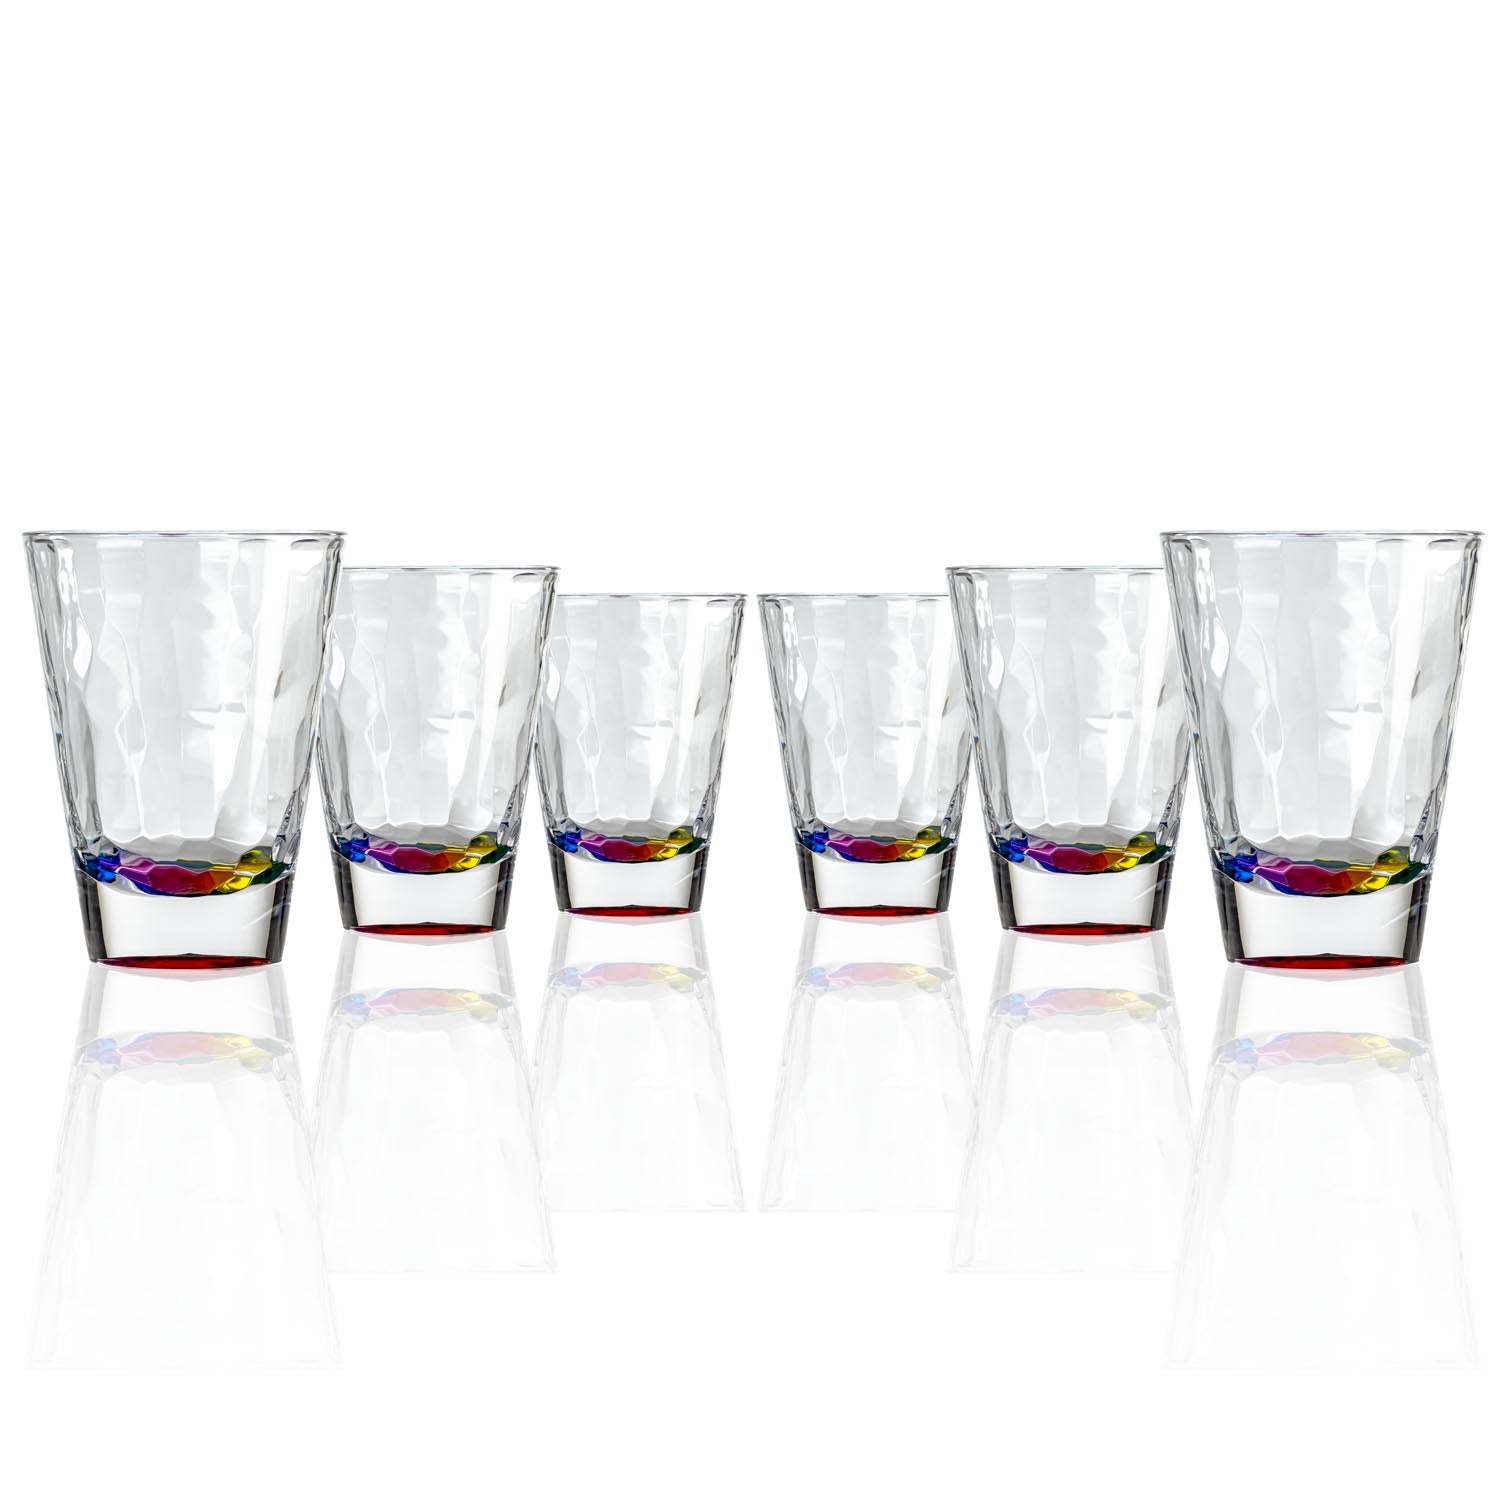 Set of 6, 14-ounce rainbow acrylic tumbler glasses from the Merritt Designs Cascade collection. Front view on white background